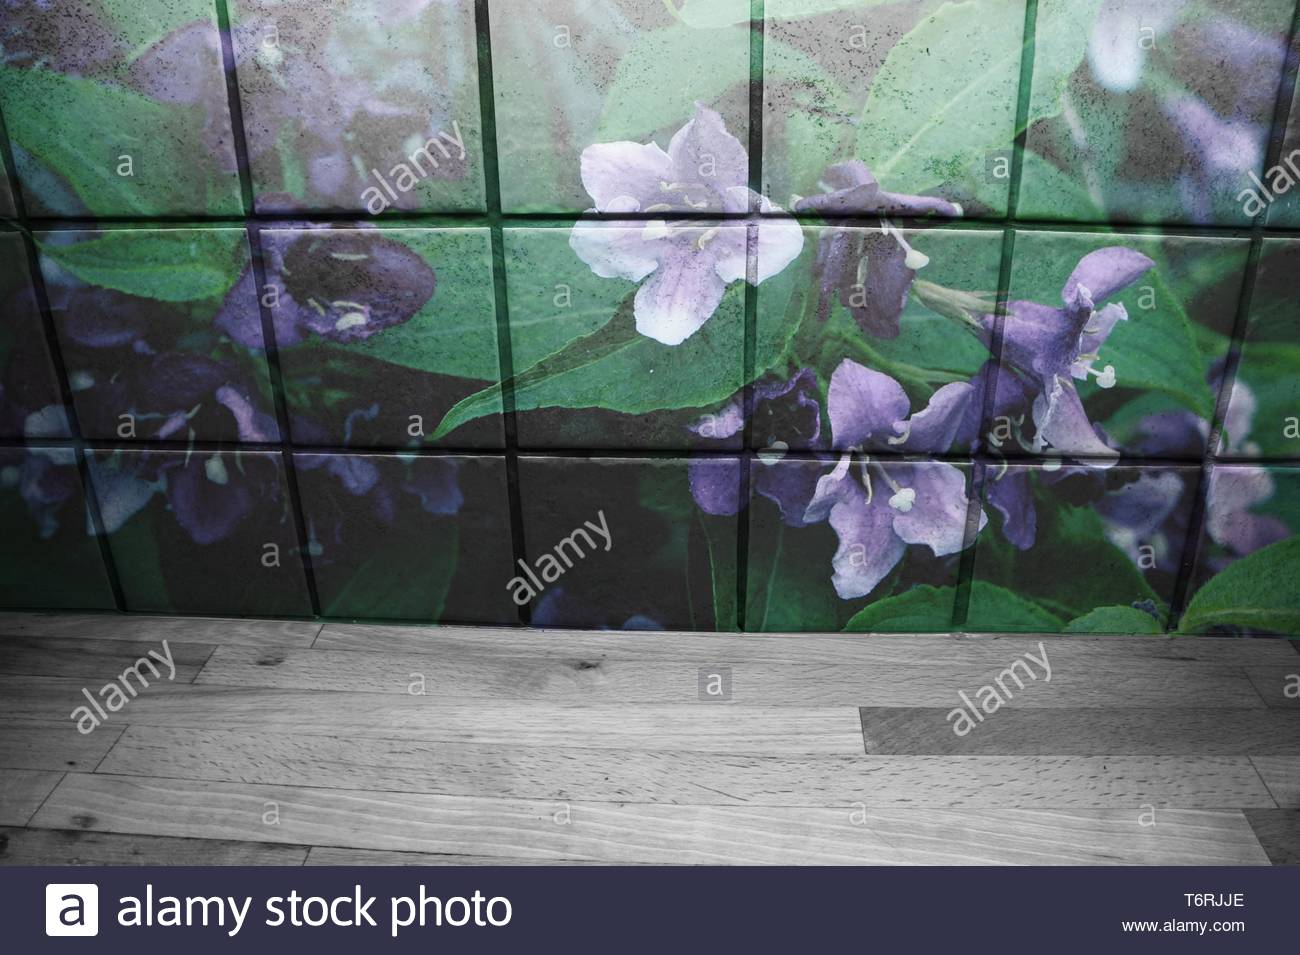 Wooden Countertop In Front Of Kitchen Tiles With Purple Flowers